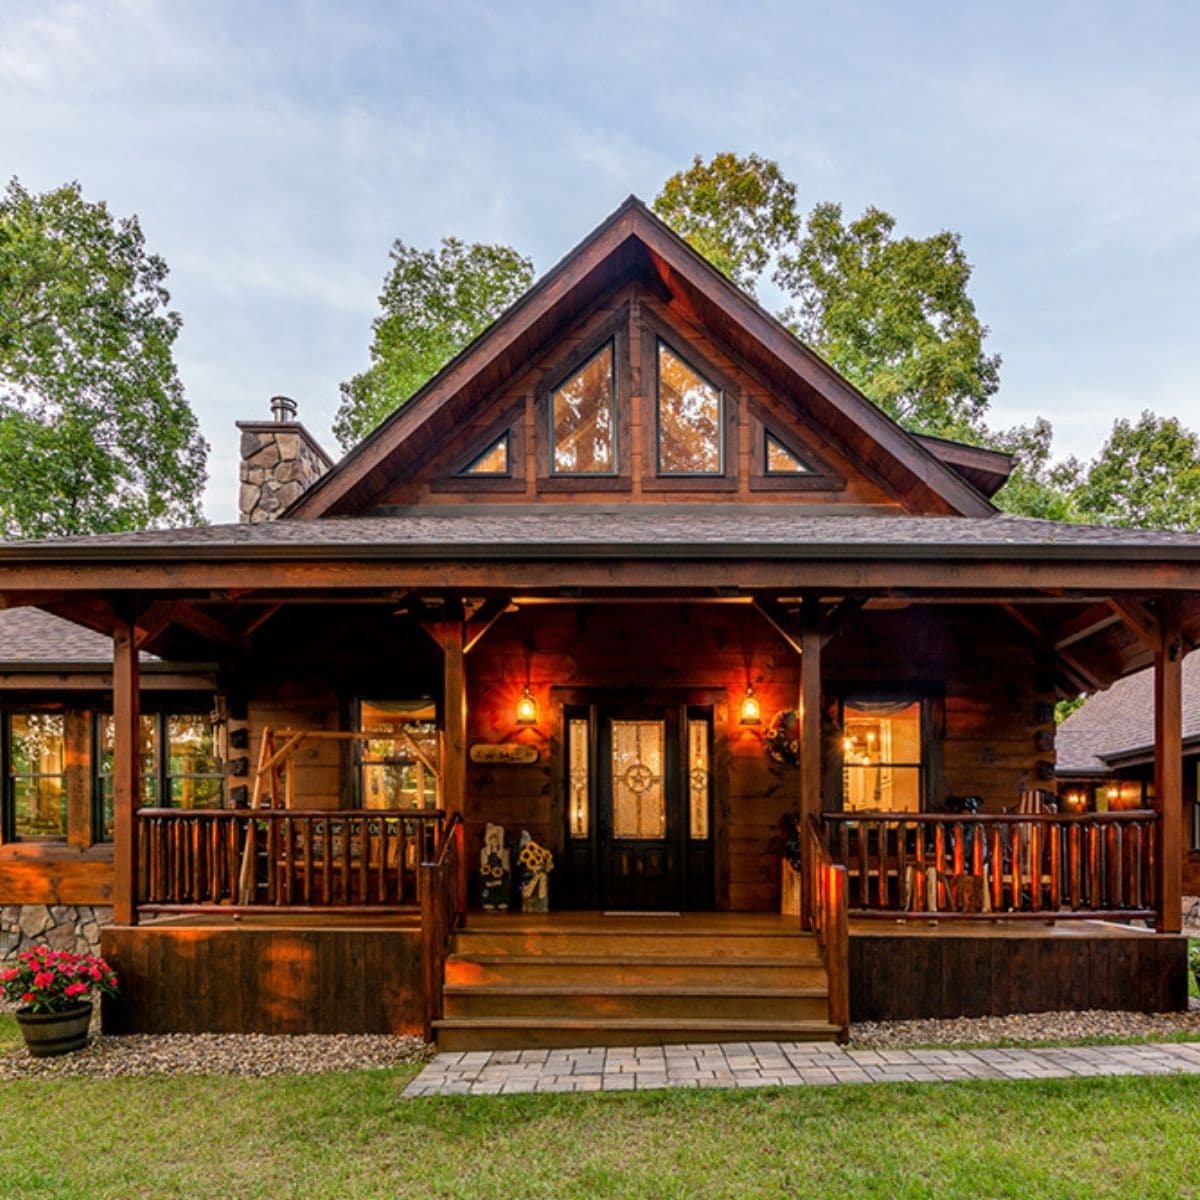 The Kentucky Wilson Log Cabin is a Timeless Classic Home